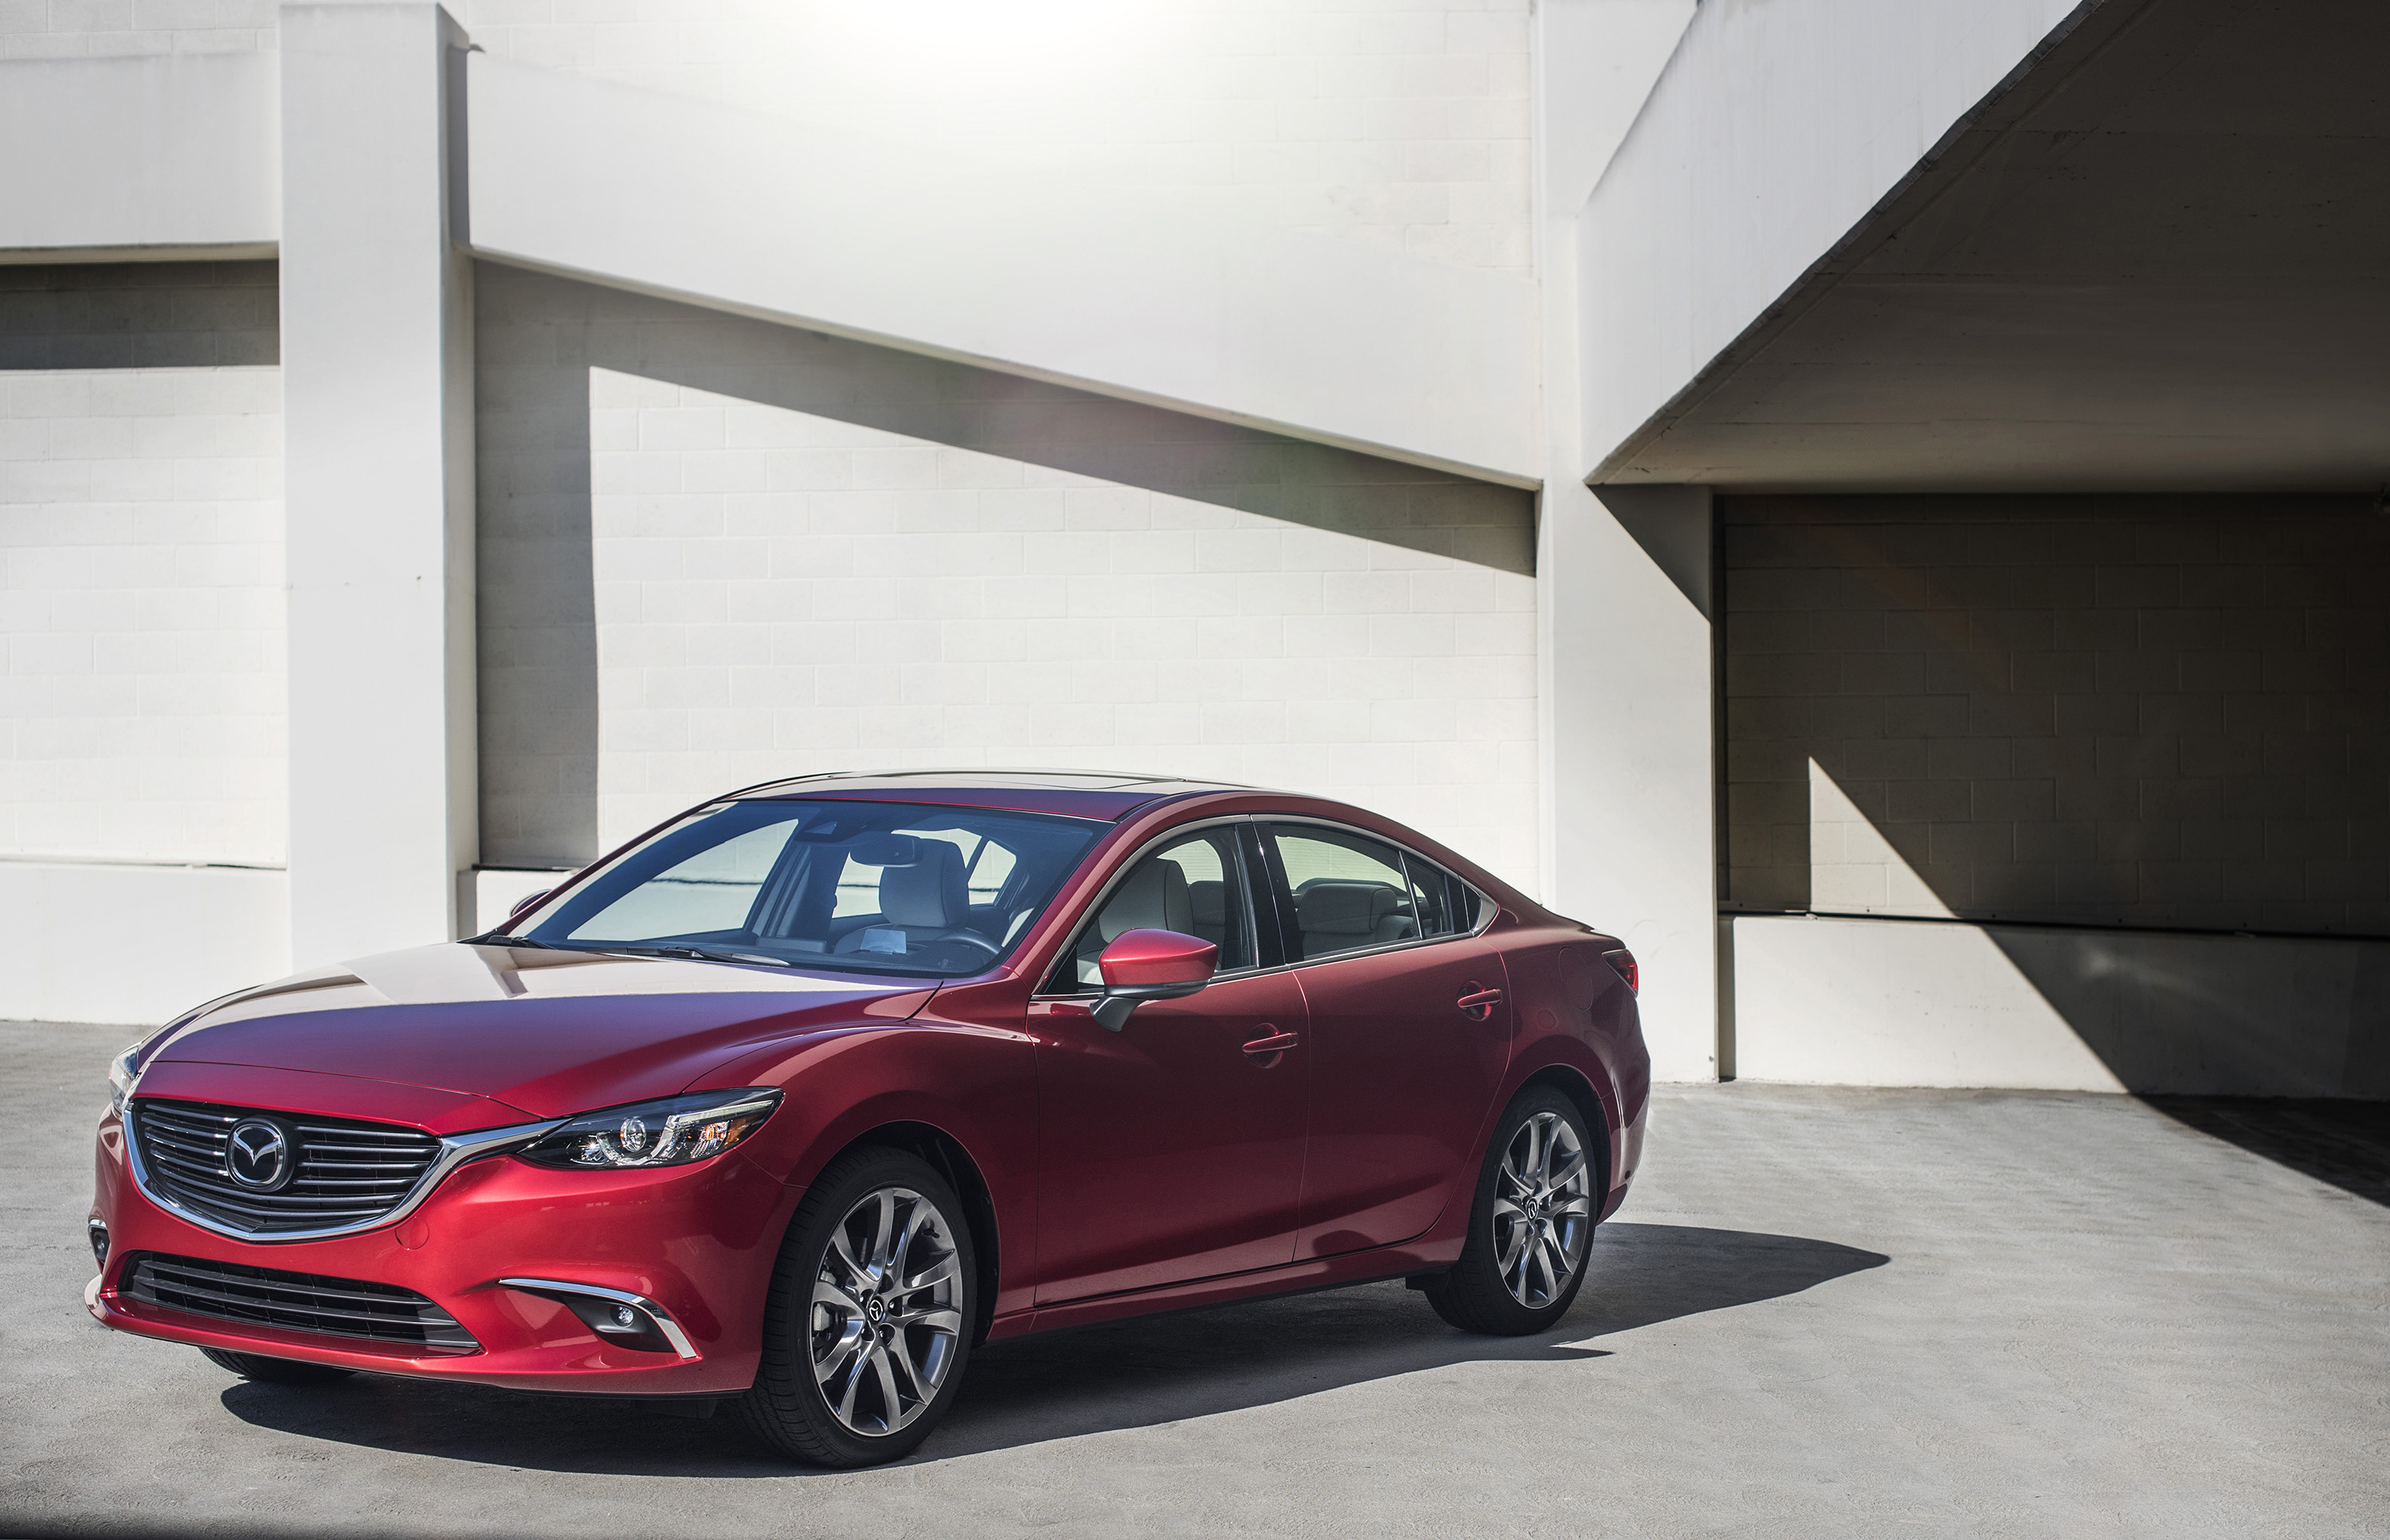 2017.5 Mazda6 Sedan Adds Available Leather to the Core of Mazda’s Midsize Mix